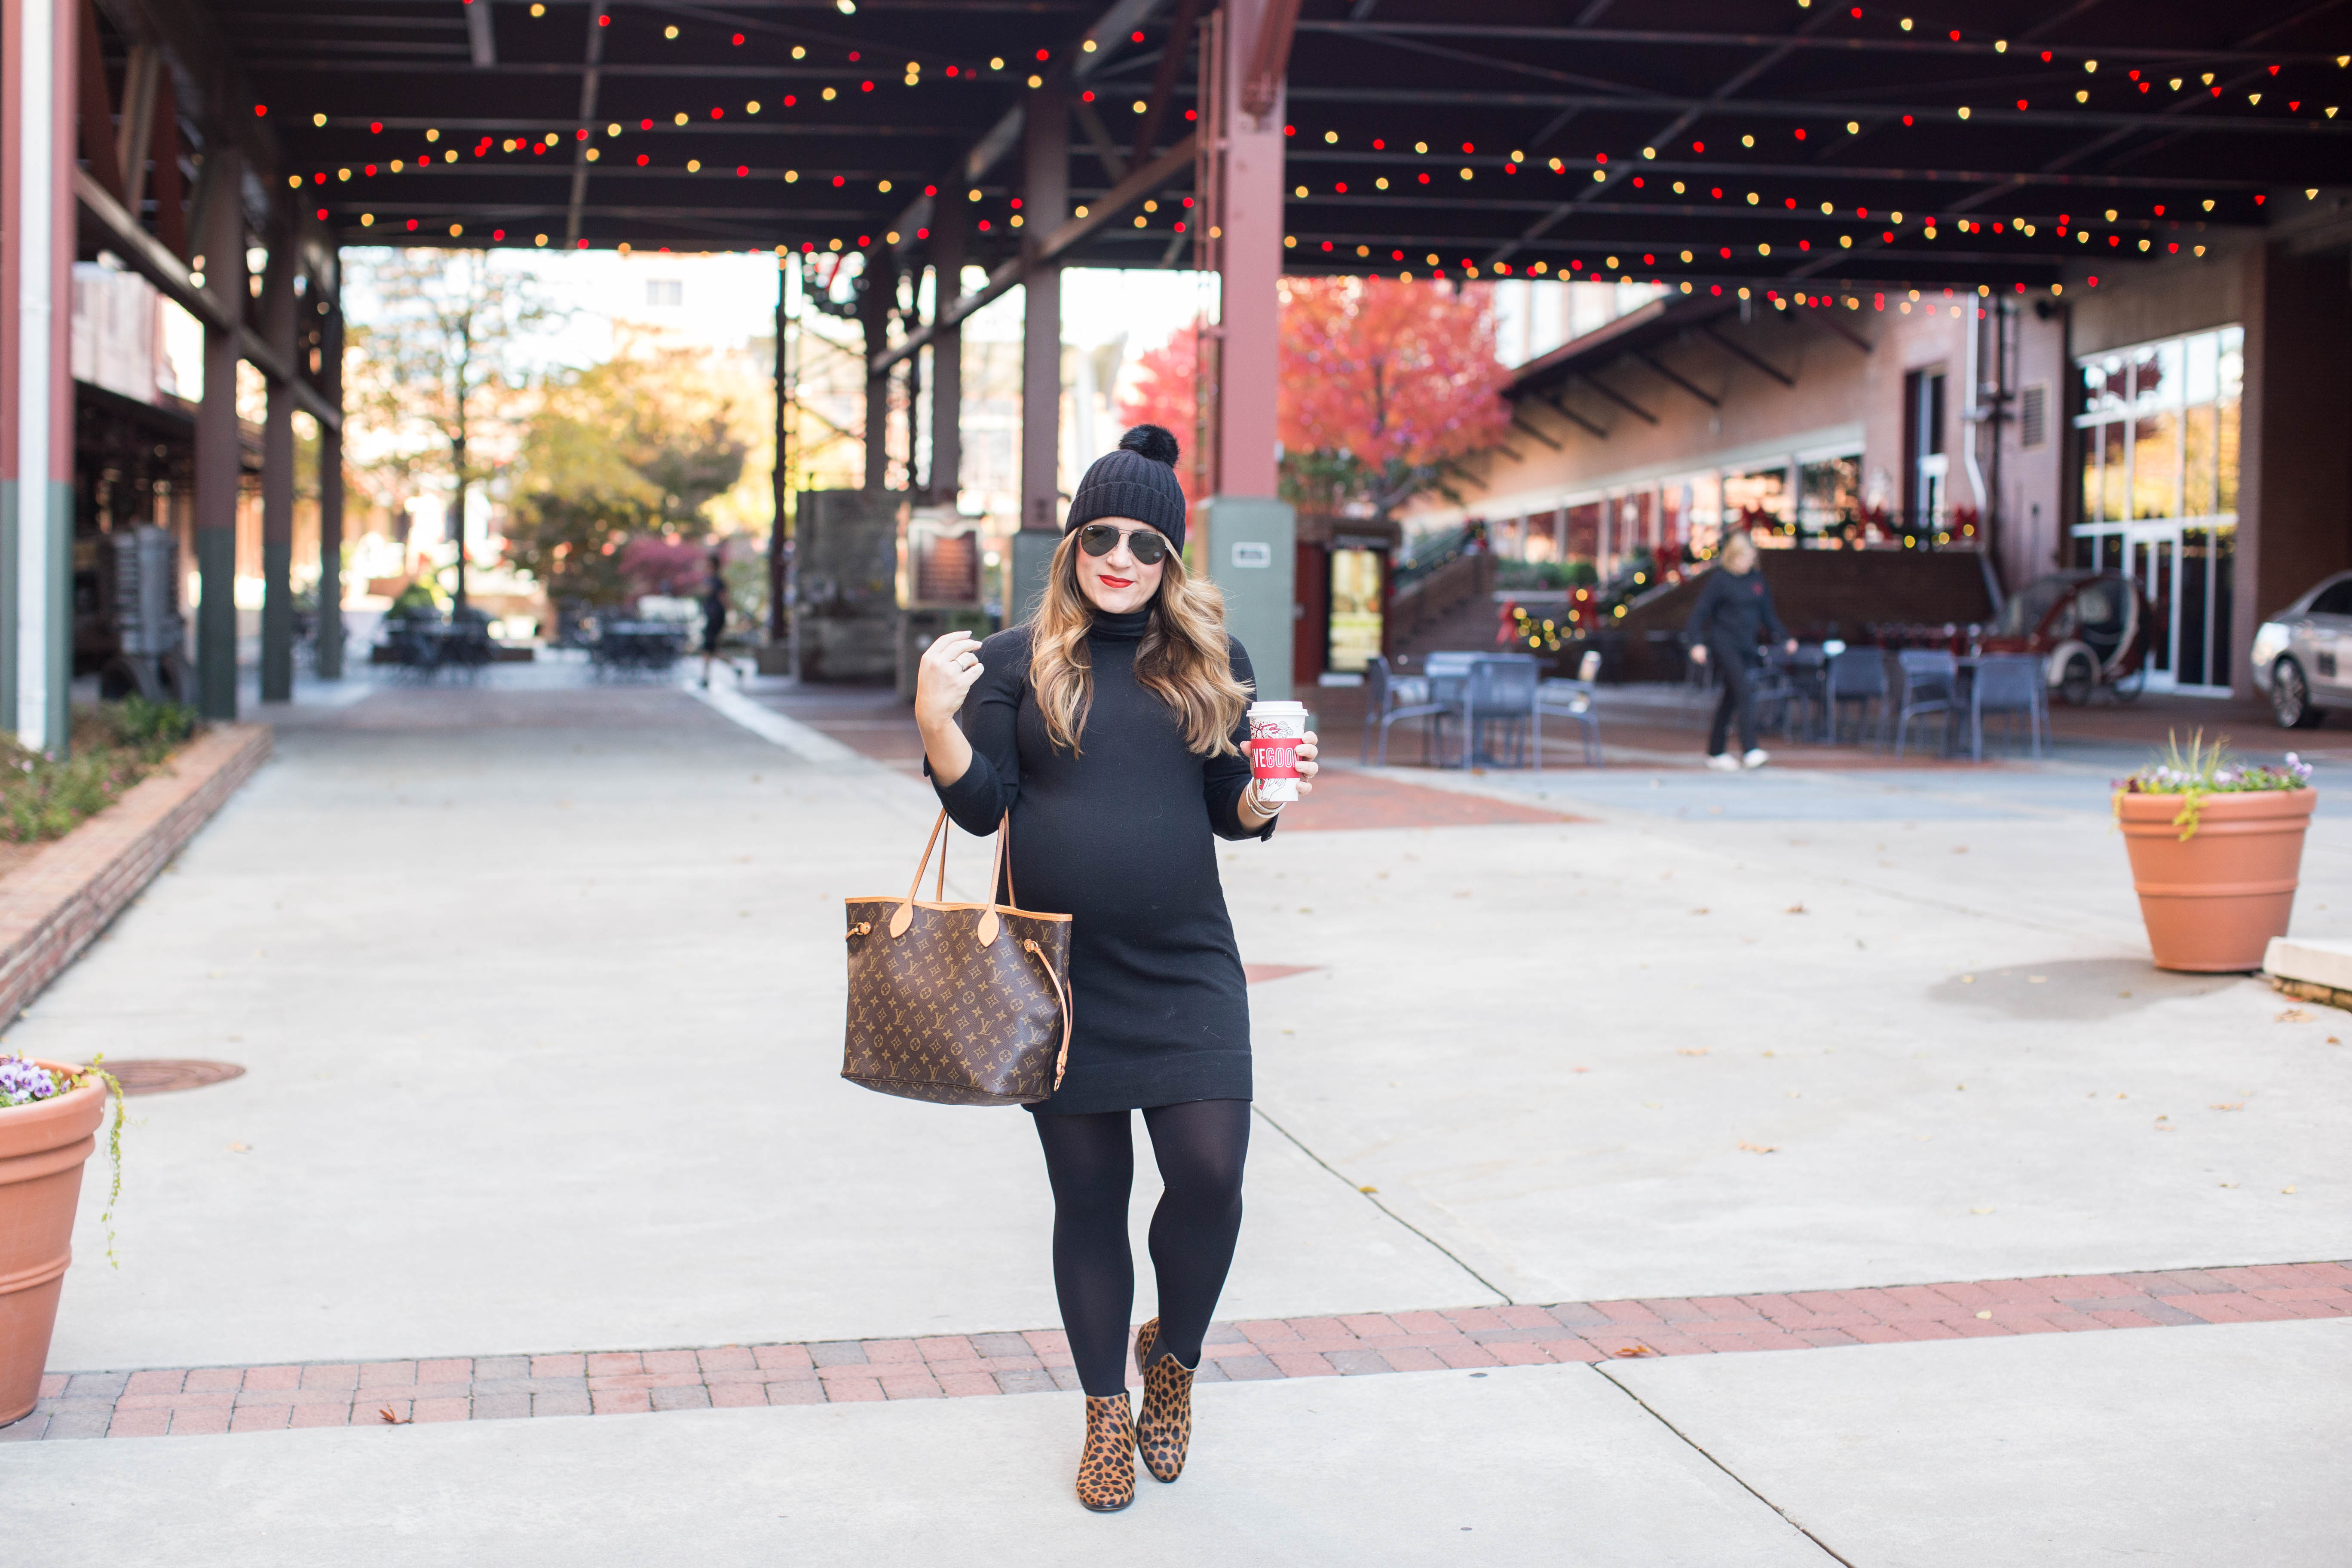 Little Black Turtleneck Dress by North Carolina fashion blogger Coffee Beans and Bobby Pins